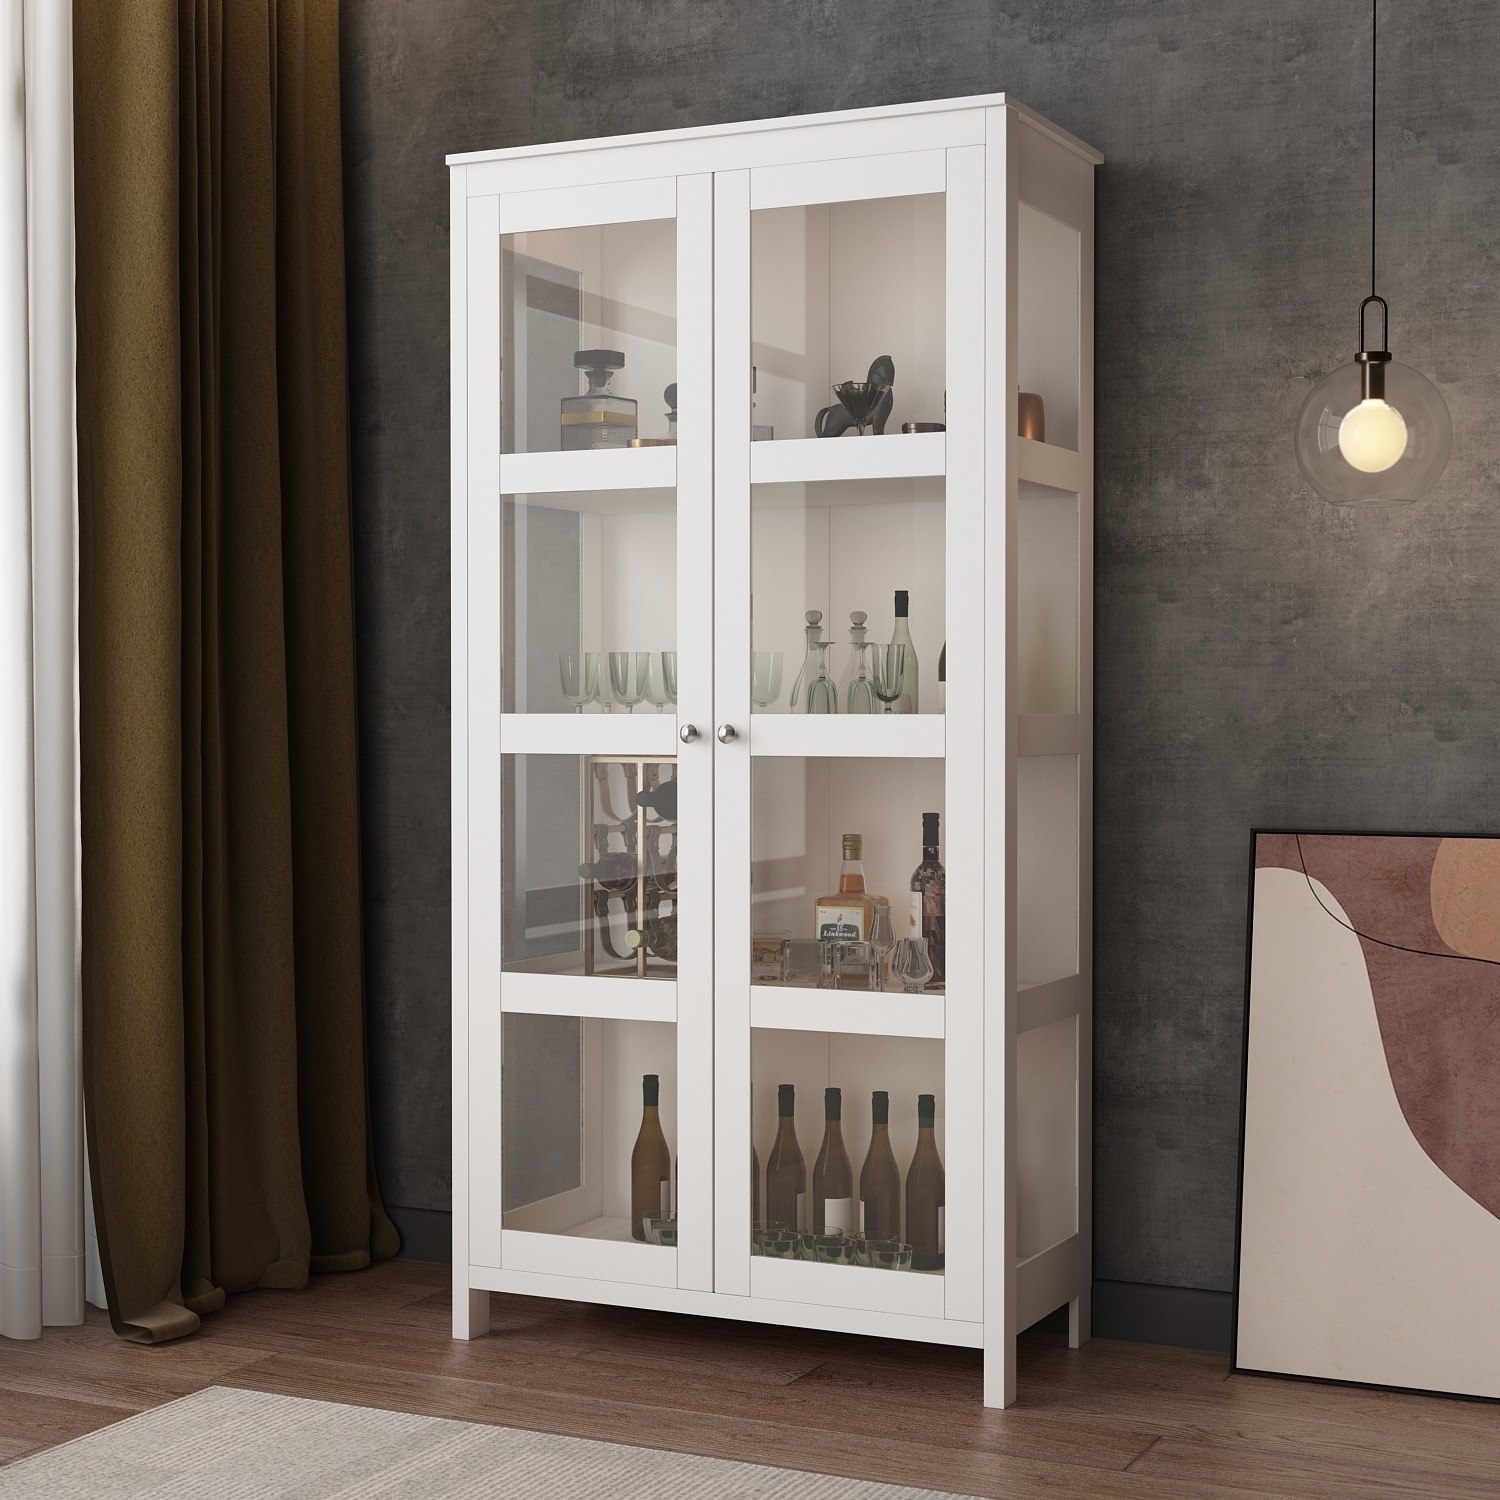 https://ak1.ostkcdn.com/images/products/is/images/direct/26ffe0d3cc202e70c403092062015eadd1baed02/Kerrogee-Tall-Storage-Cabinet-with-4-Tier-Shelf-Acrylic-Glass%2C-White.jpg